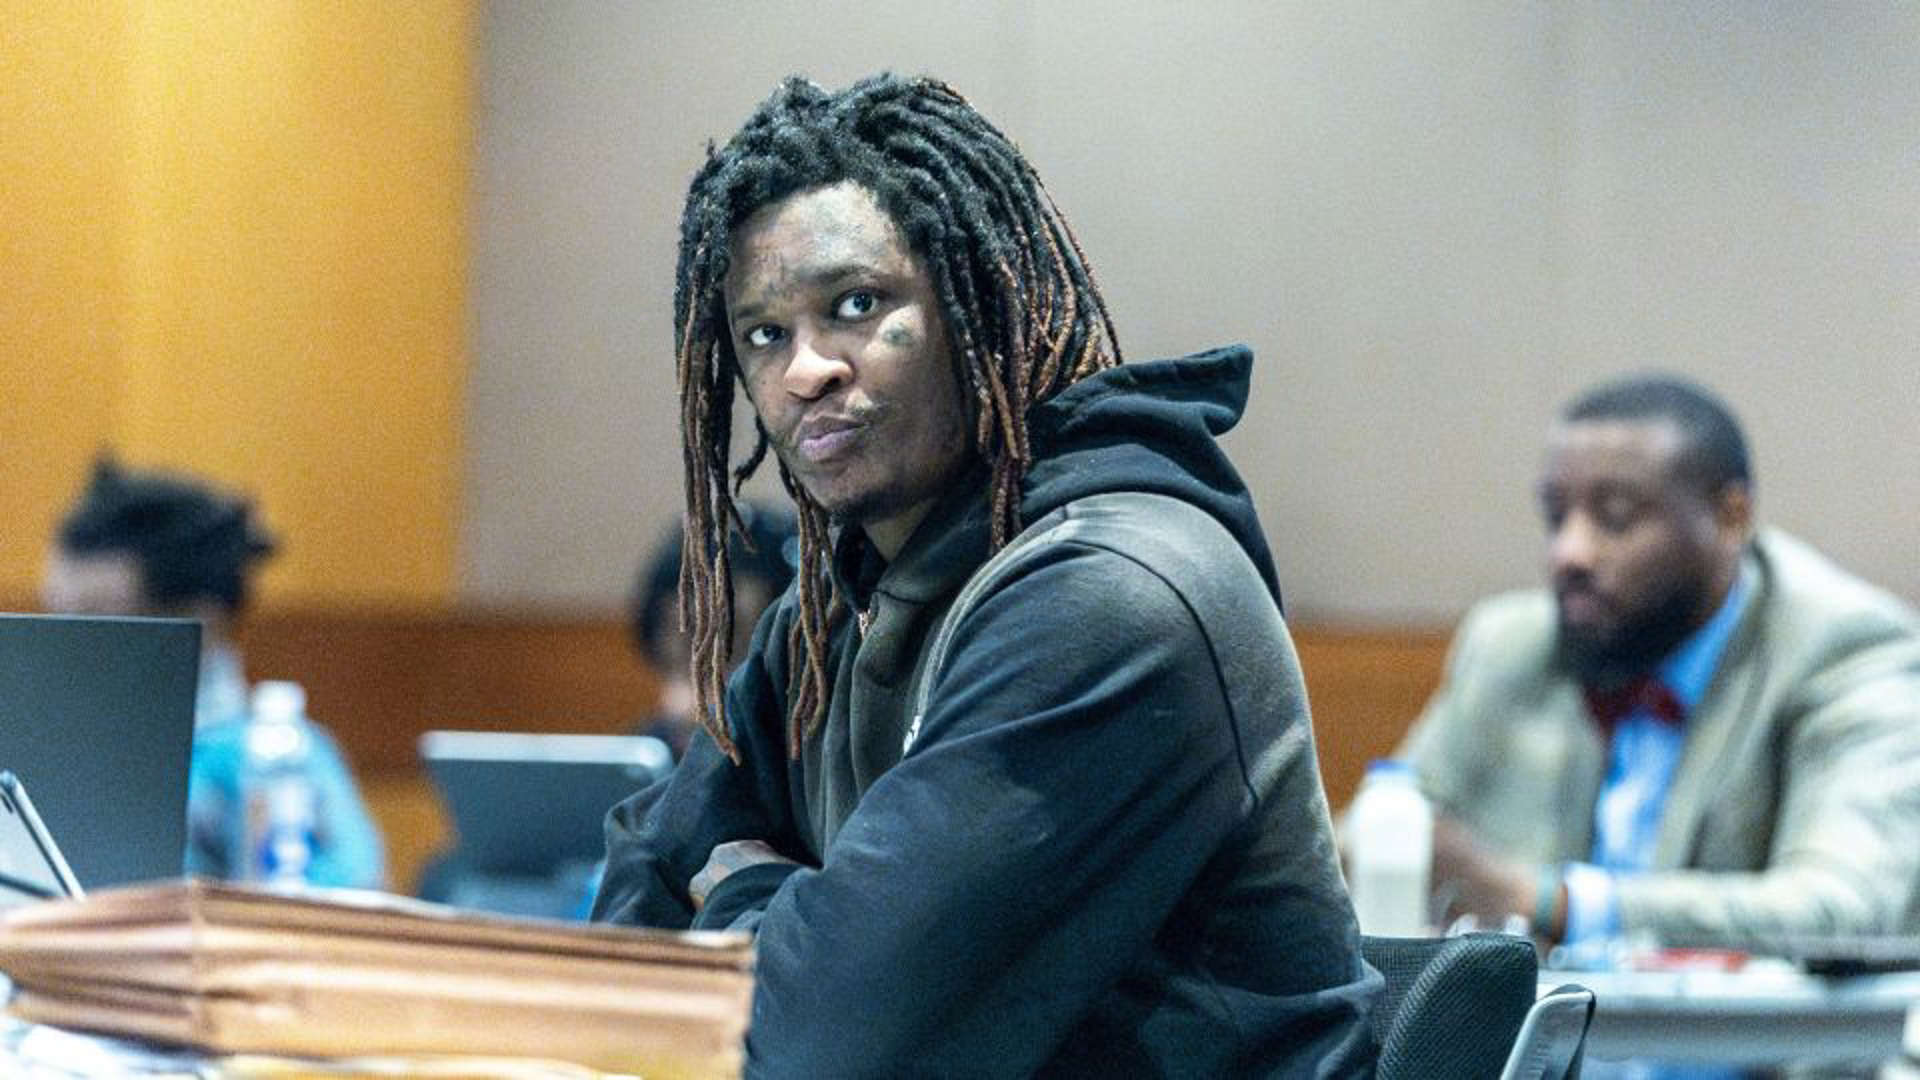 Get the scoop on Young Thug and the YSL RICO case with these 5 must-know facts.